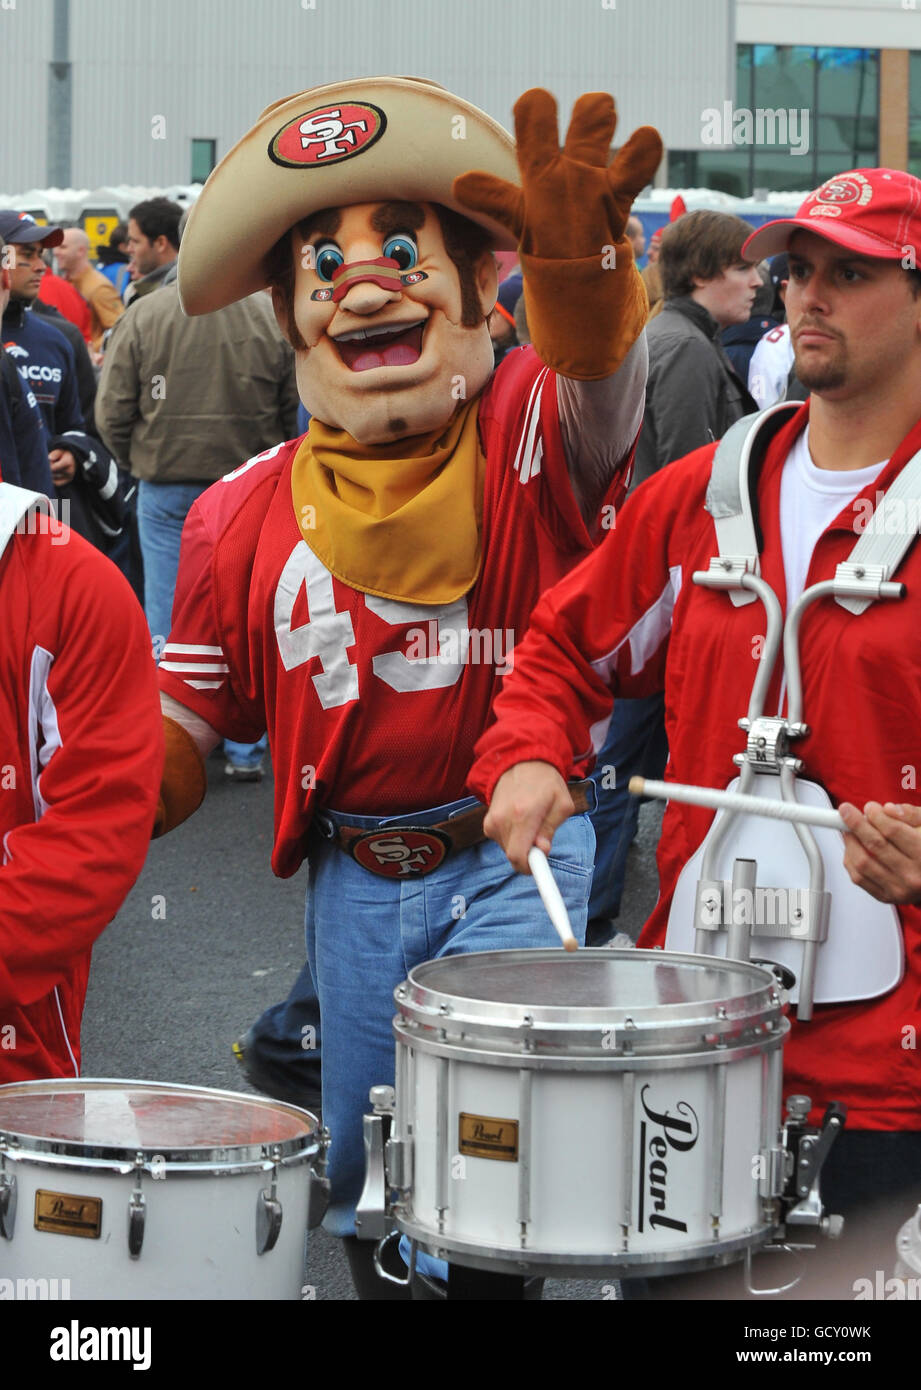 San Francisco 49ers band and mascot outside the ground Stock Photo